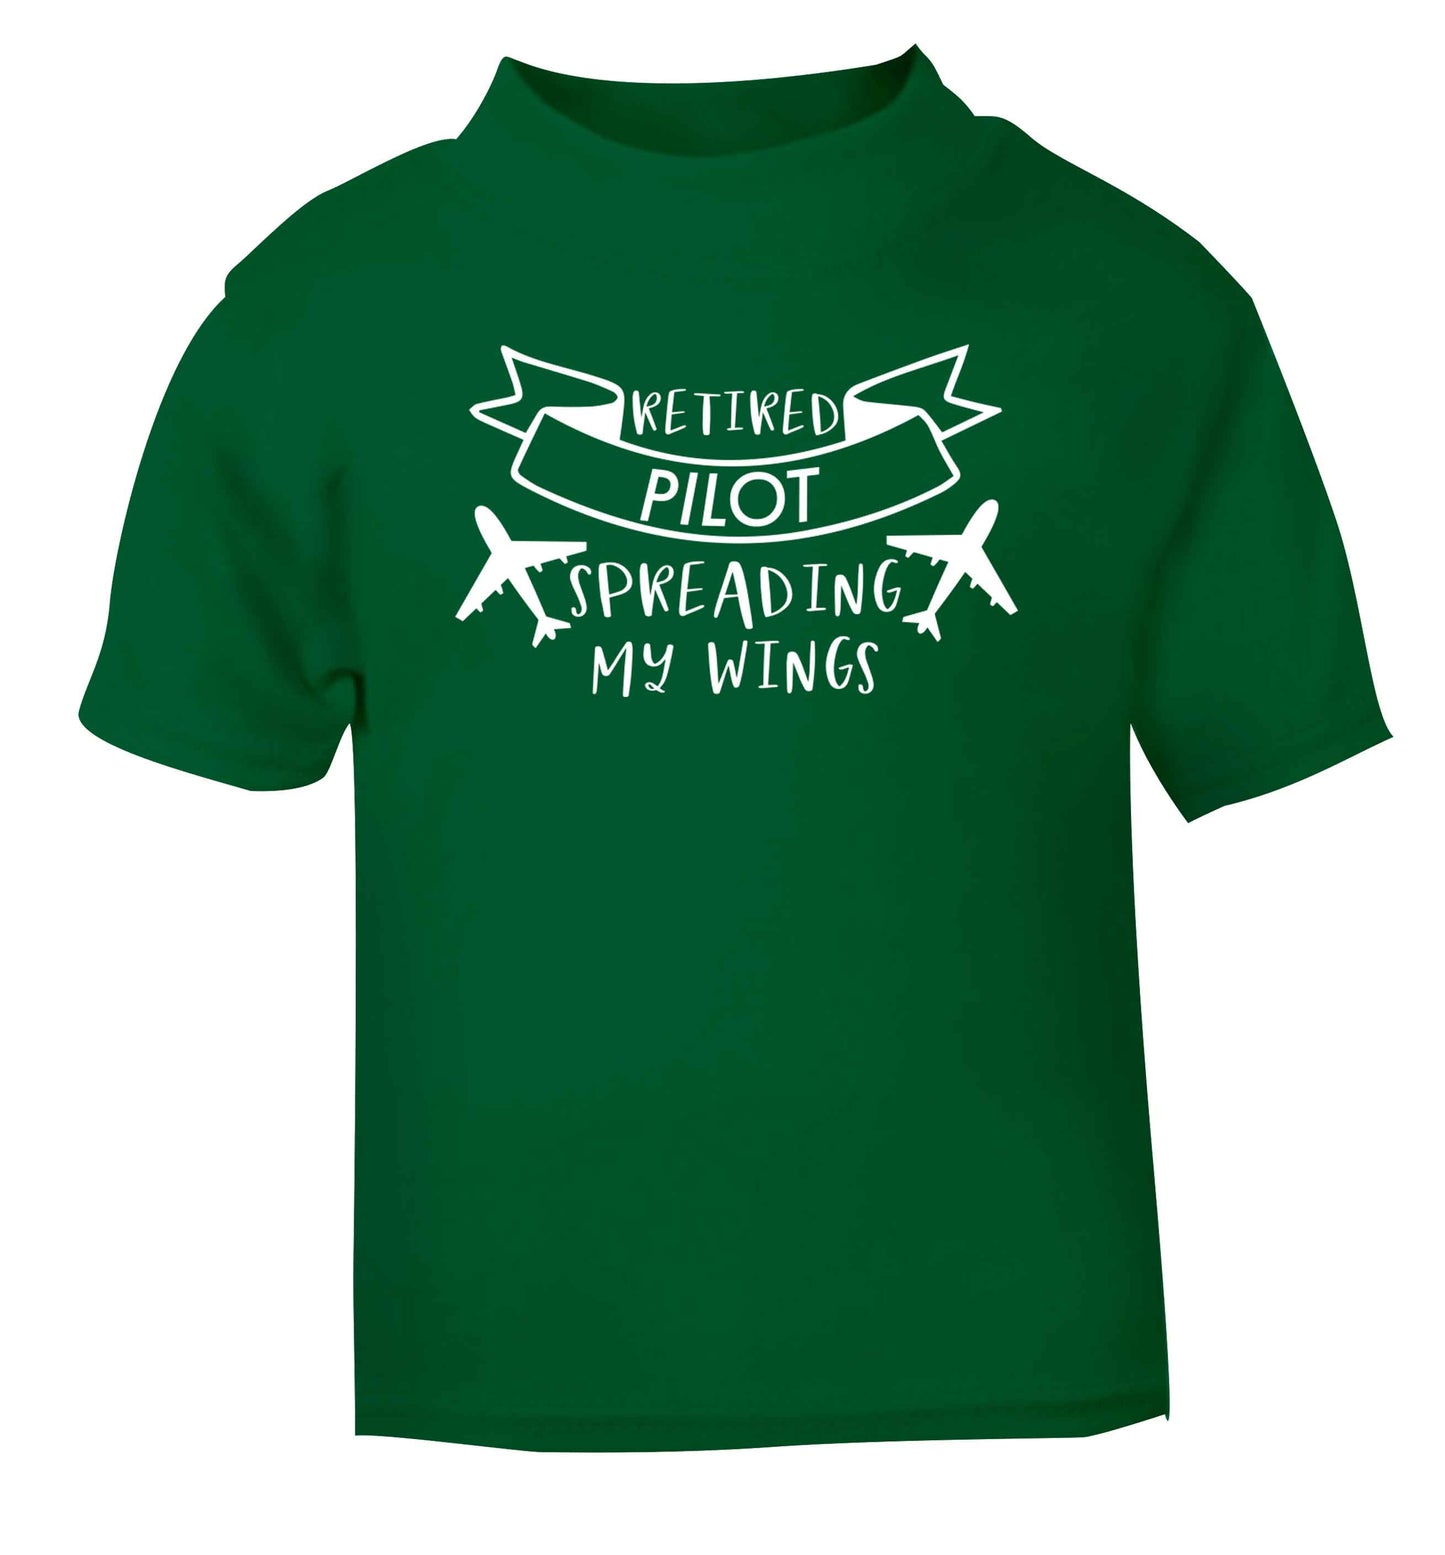 Retired pilot spreading my wings green Baby Toddler Tshirt 2 Years